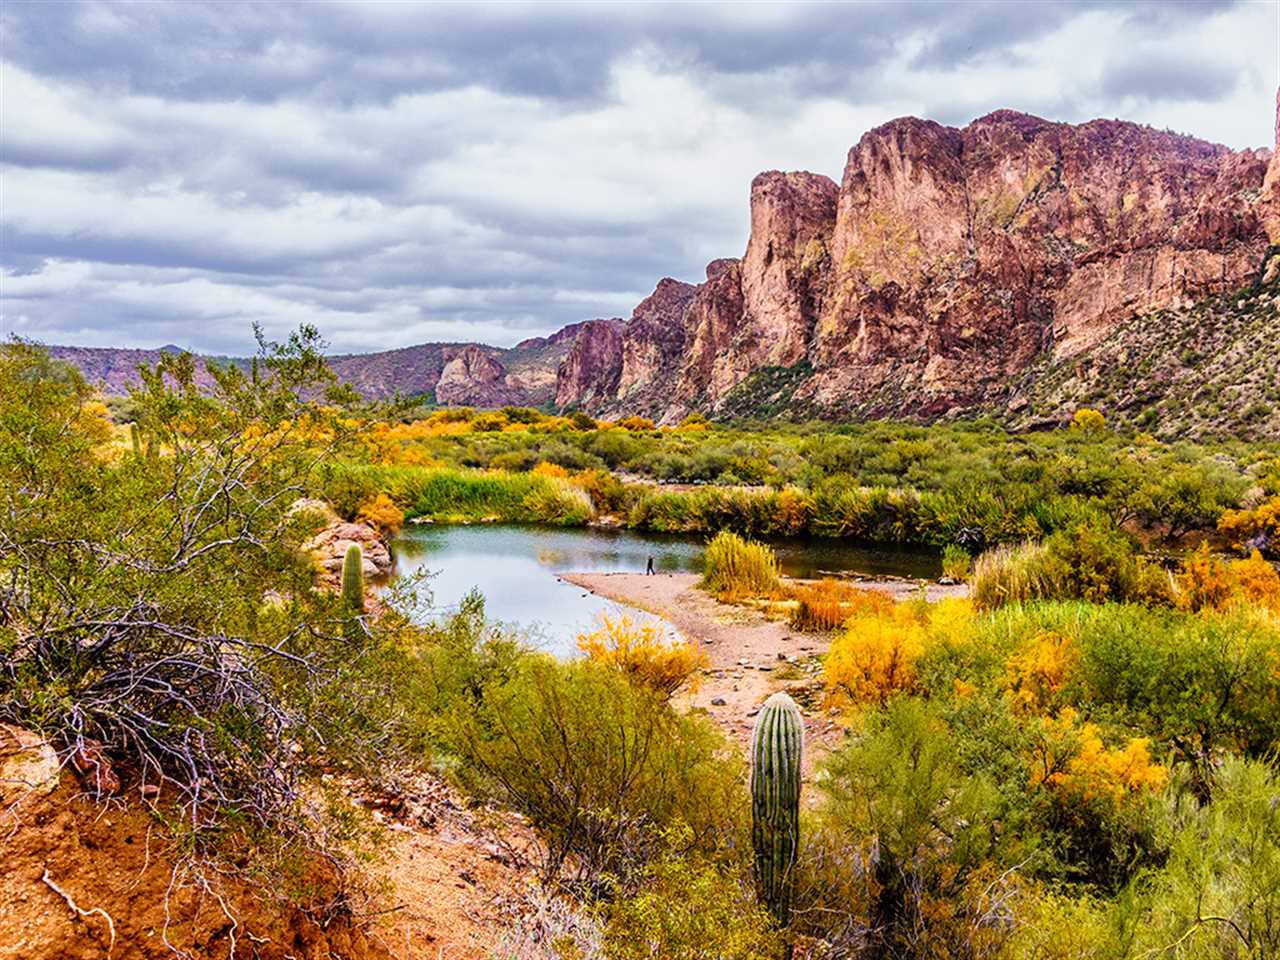 The Salt River in Arizona running past craggy rocks and cacti on a cloudy day